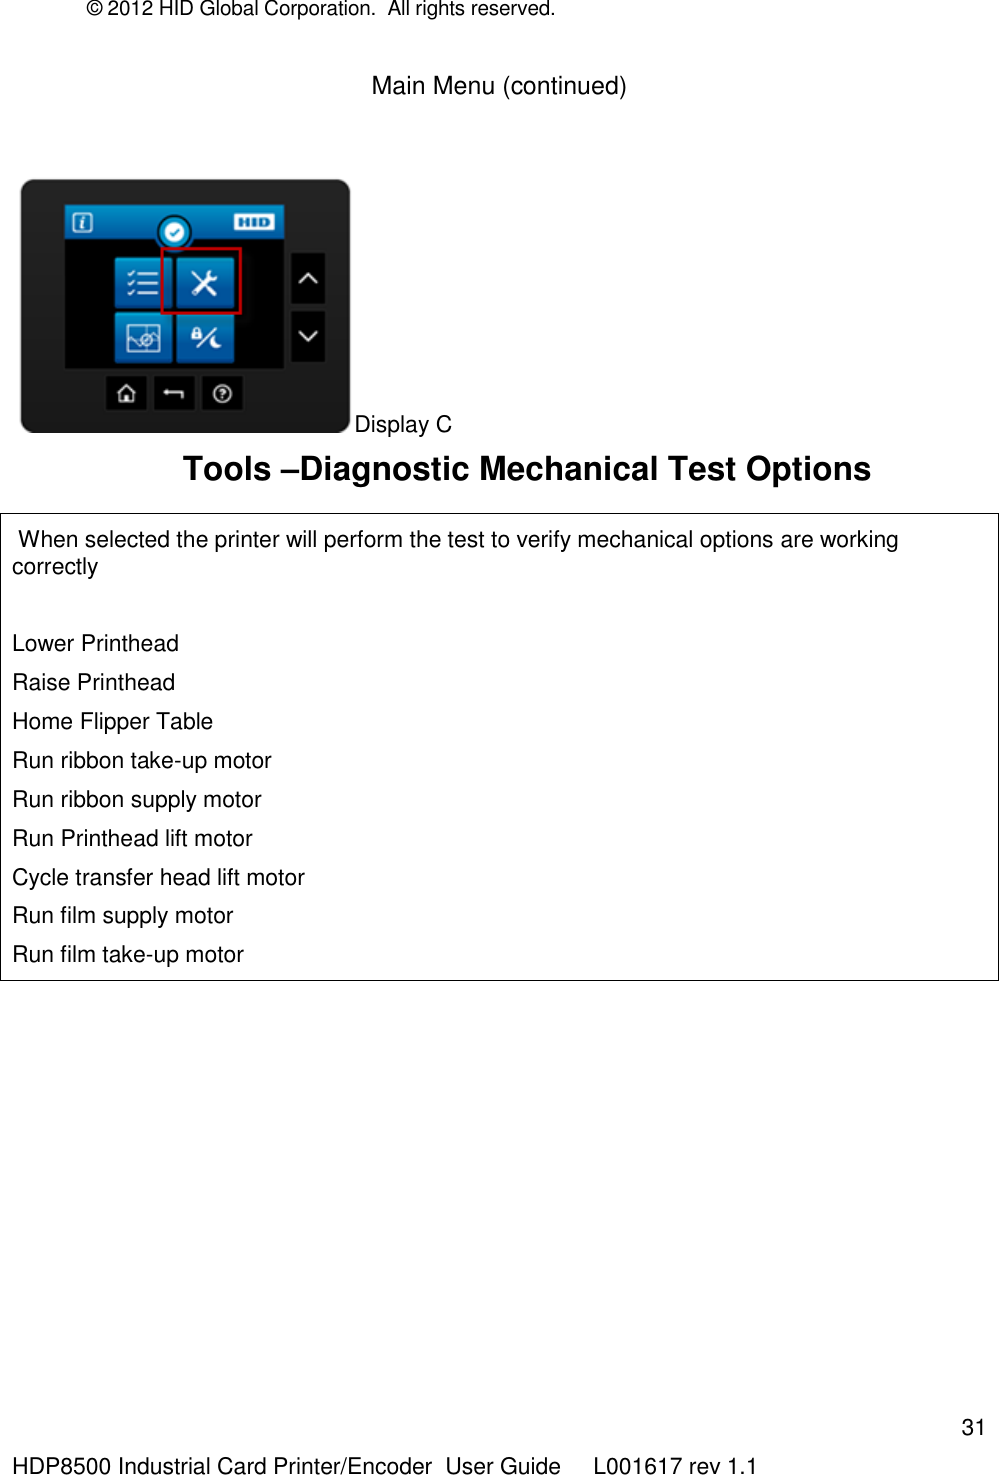 © 2012 HID Global Corporation.  All rights reserved.  31 HDP8500 Industrial Card Printer/Encoder  User Guide     L001617 rev 1.1 Main Menu (continued)  Display C       Tools –Diagnostic Mechanical Test Options   When selected the printer will perform the test to verify mechanical options are working correctly  Lower Printhead Raise Printhead Home Flipper Table Run ribbon take-up motor Run ribbon supply motor Run Printhead lift motor Cycle transfer head lift motor Run film supply motor Run film take-up motor  